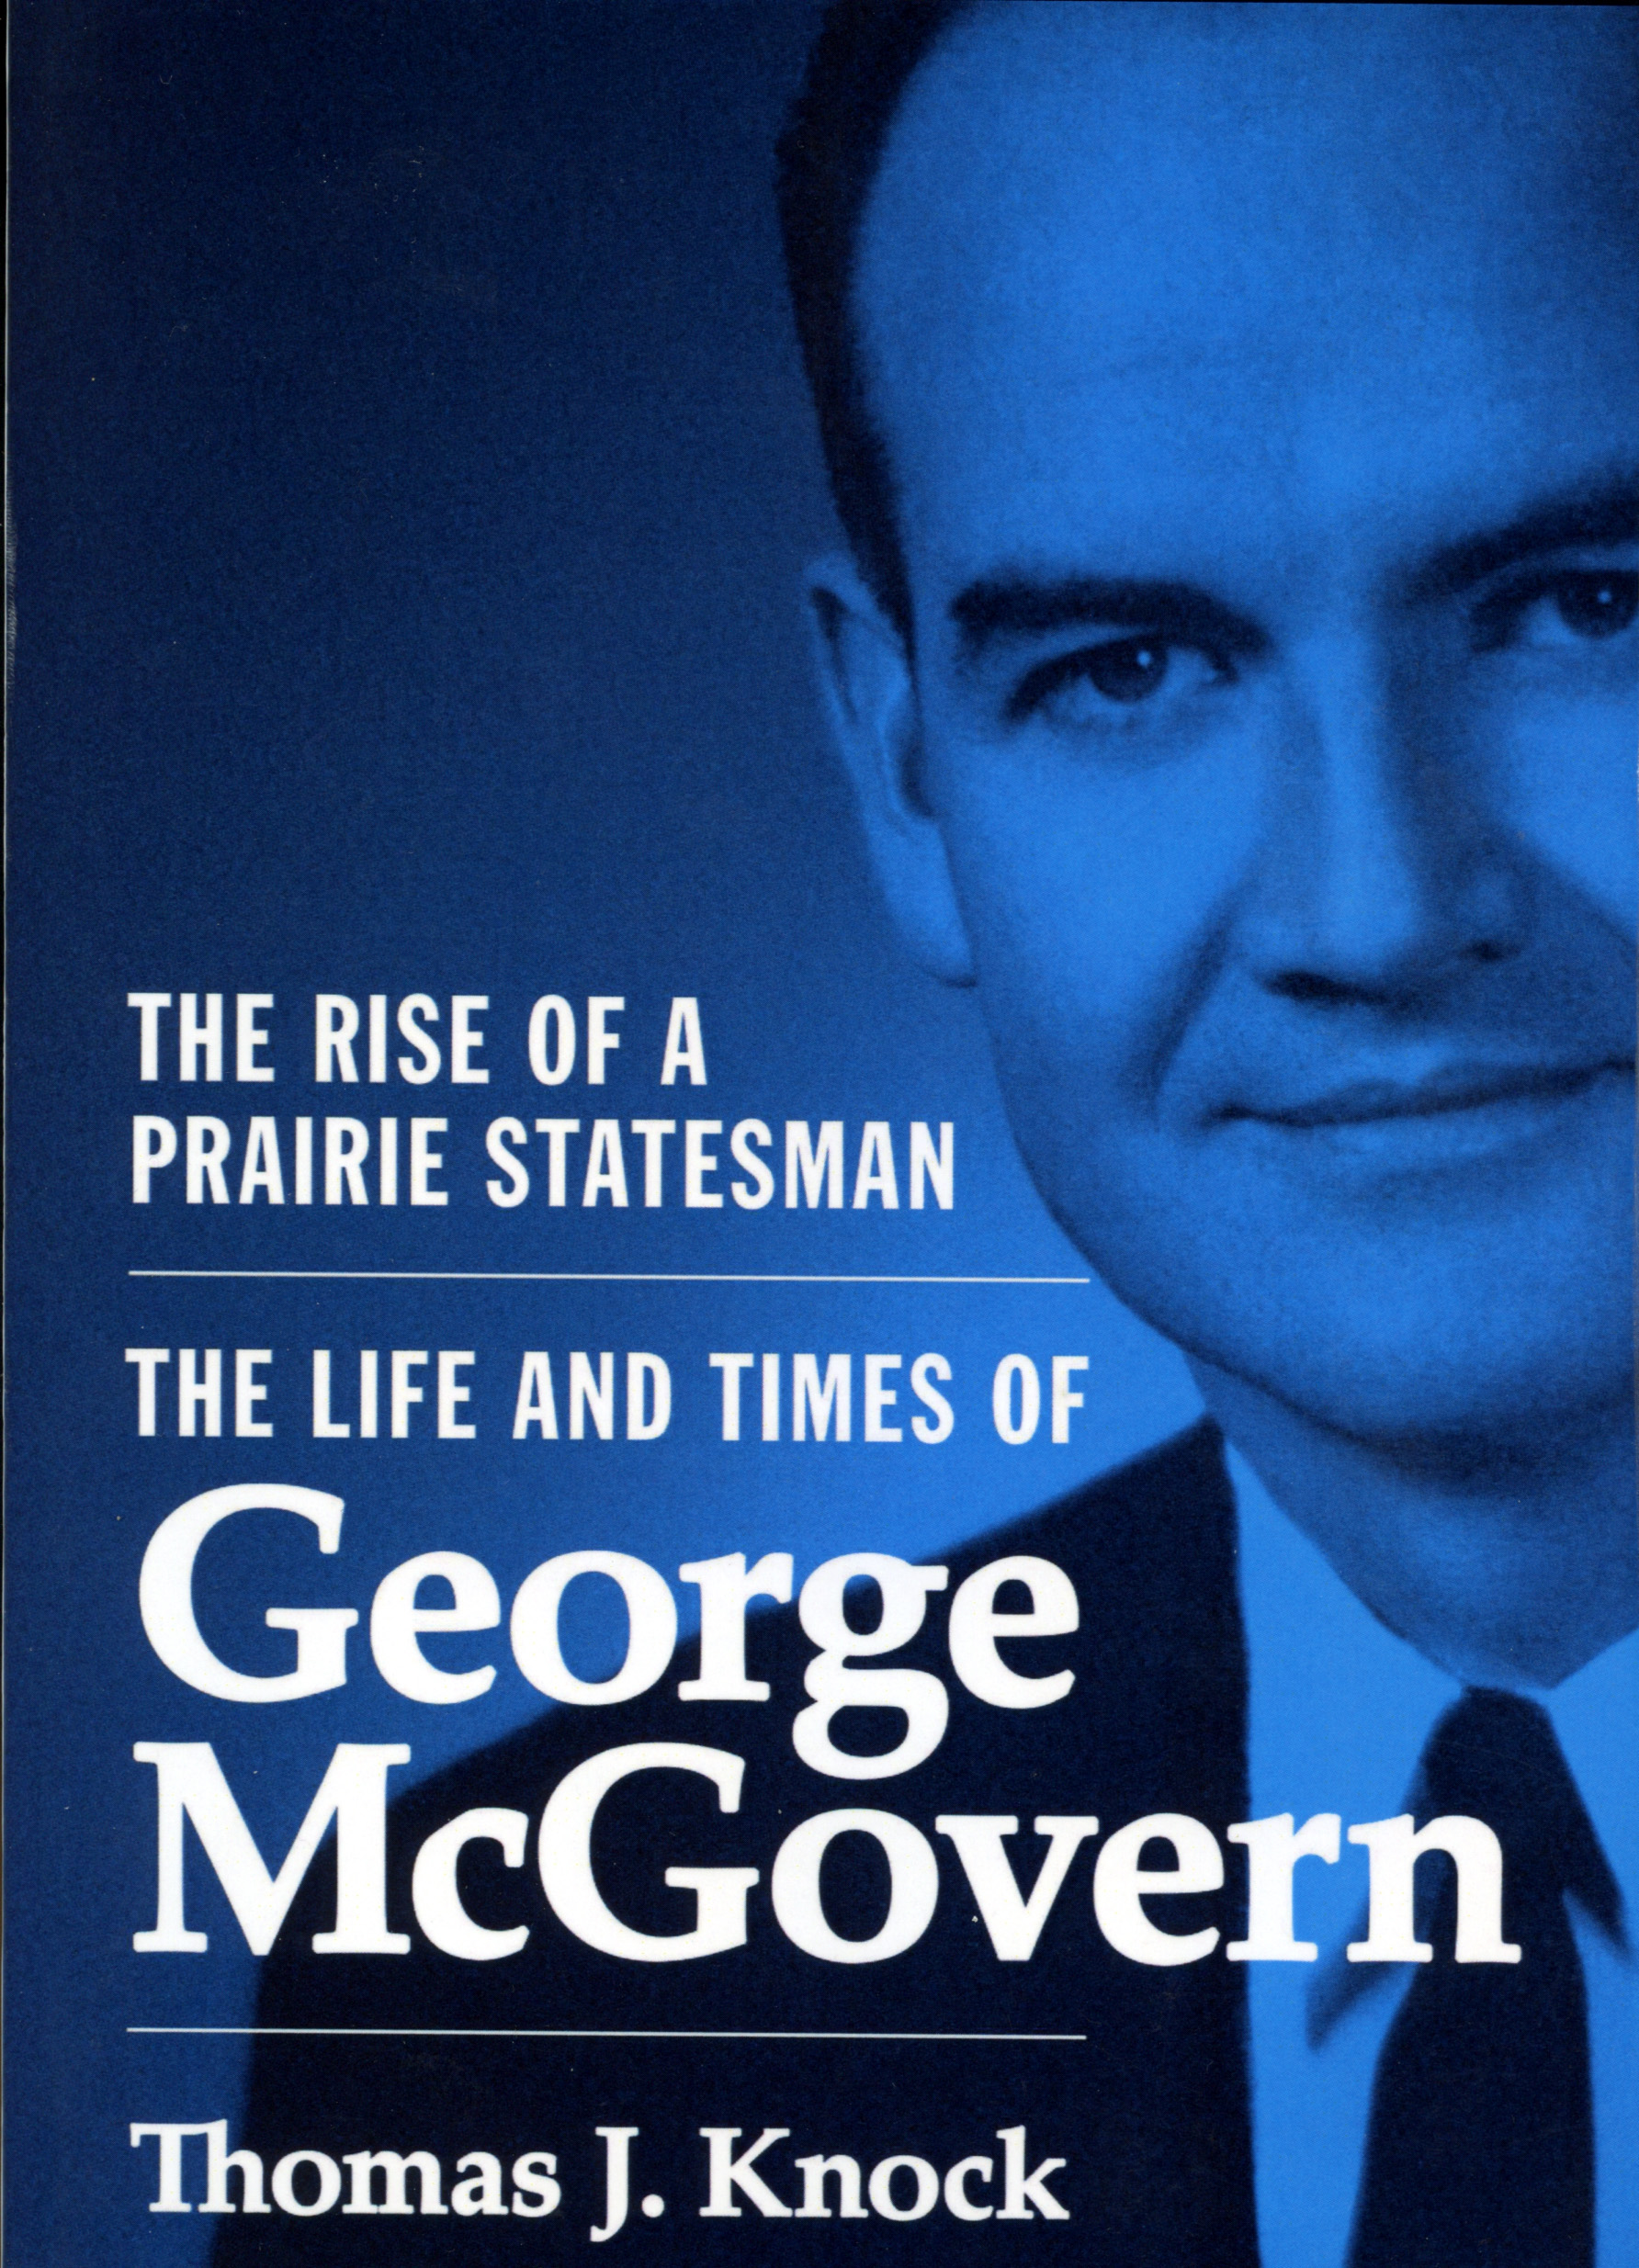 The Life and Times of George McGovern